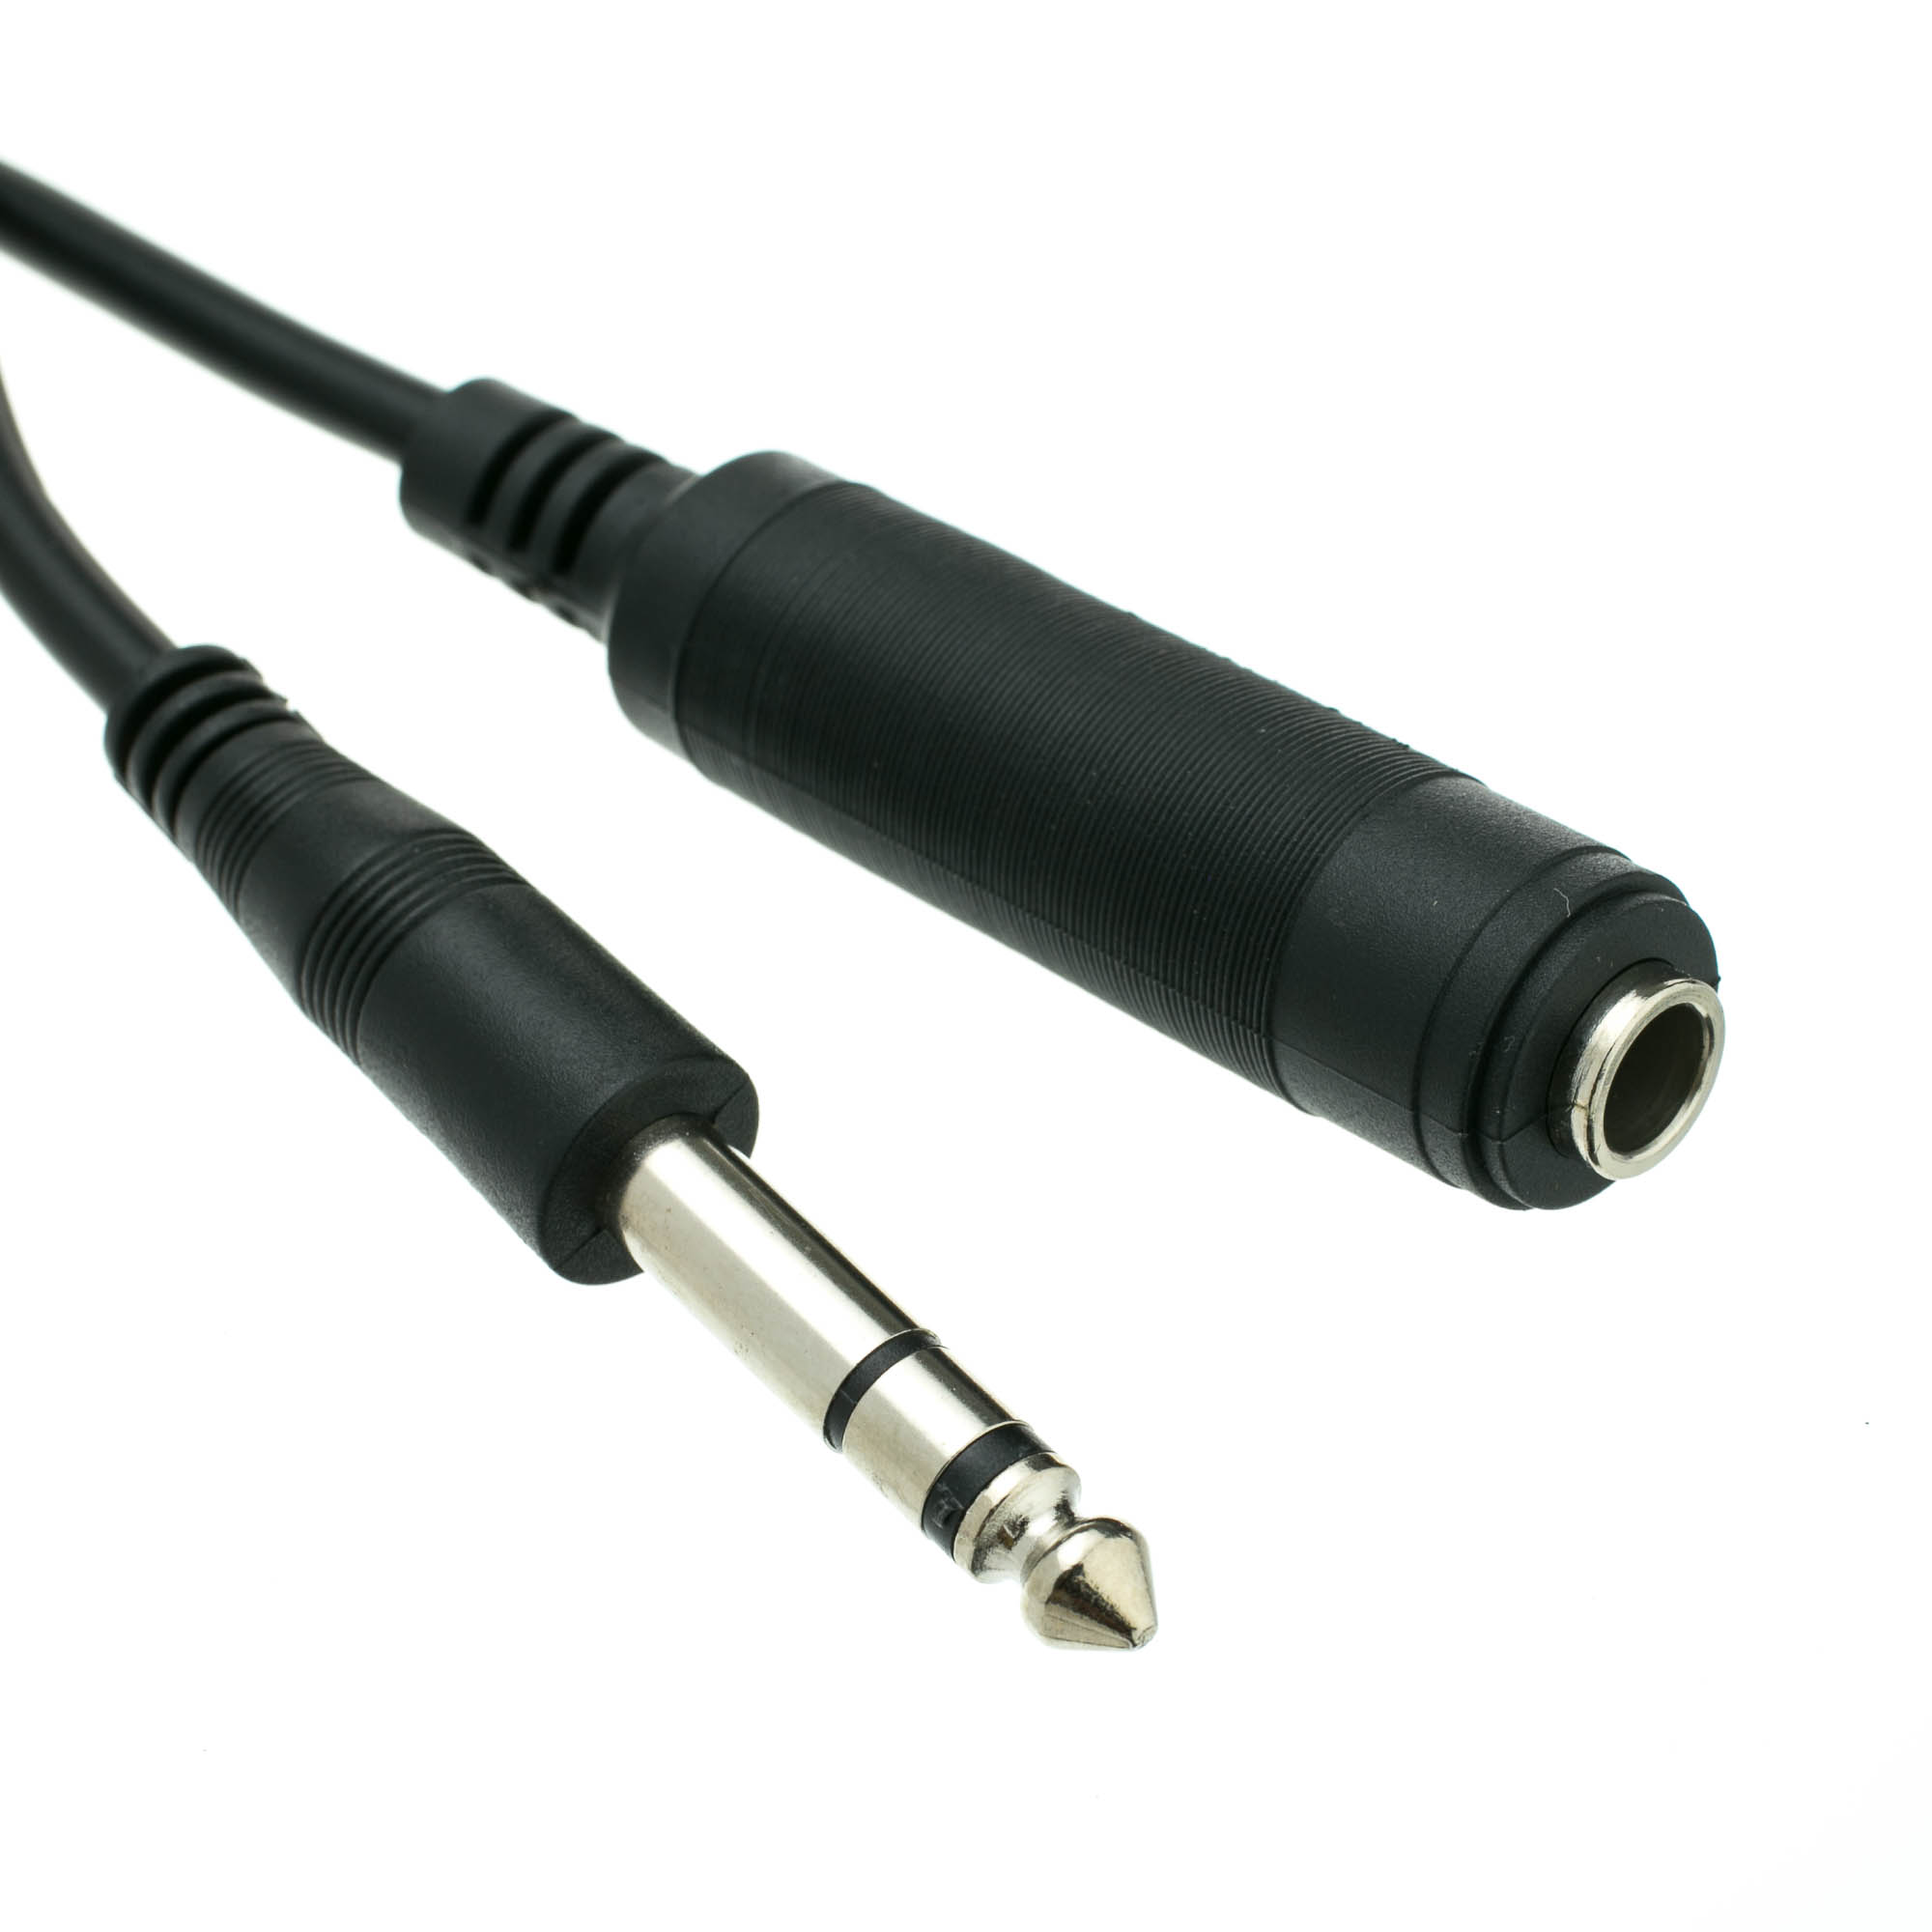 25ft 1/4 inch Stereo Extension Cable, TRS